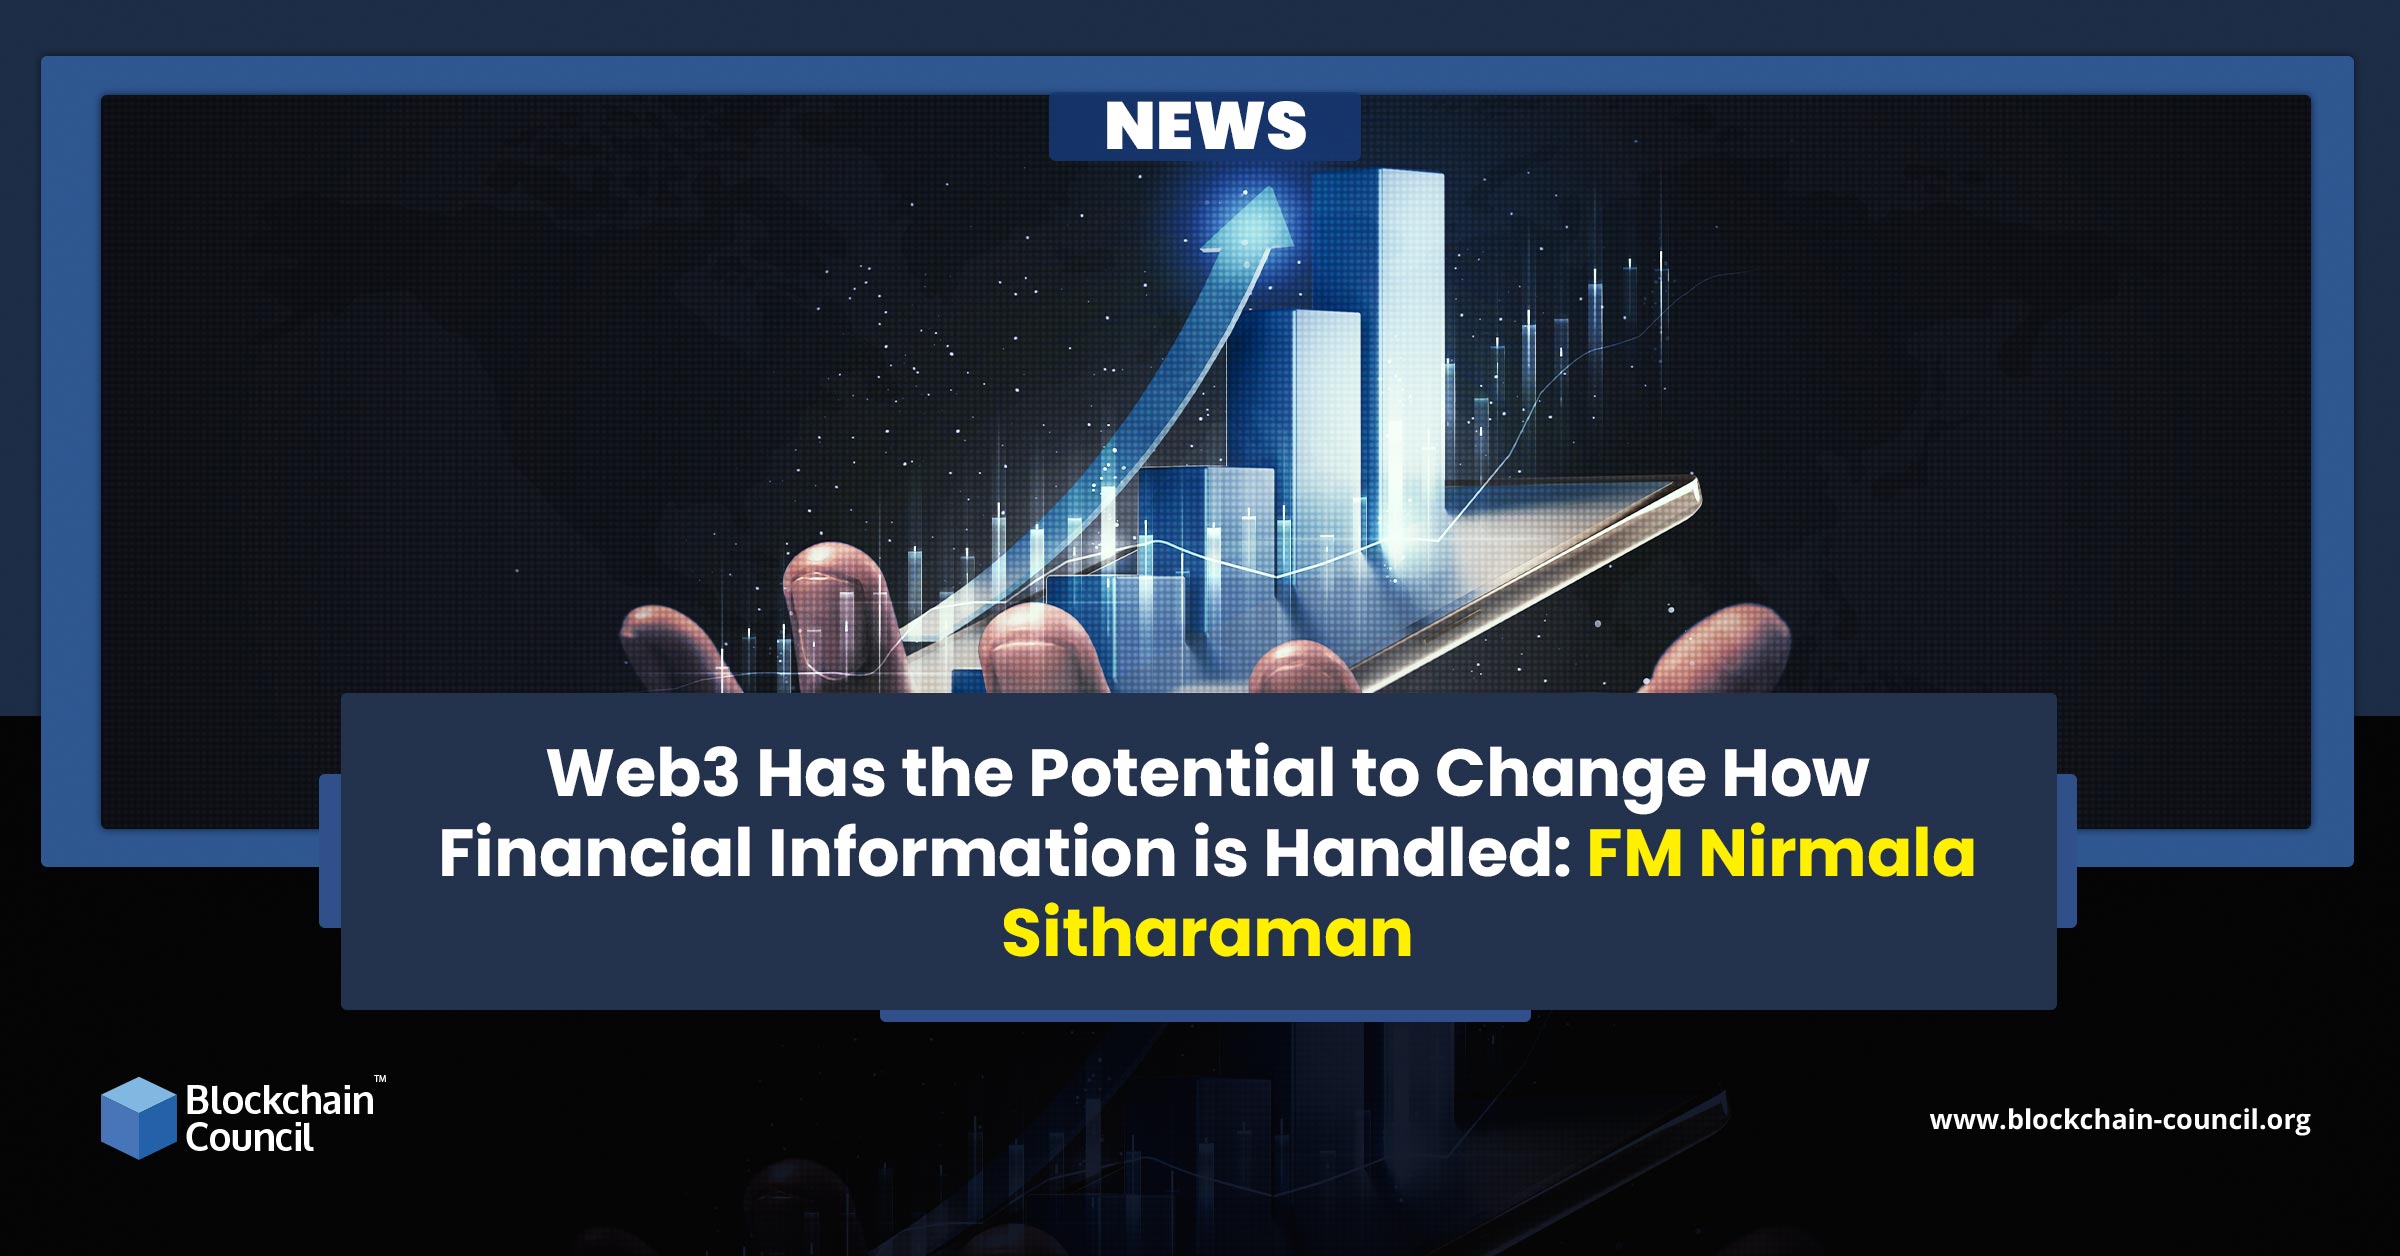 Web3 Has the Potential to Change How Financial Information is Handled FM Nirmala Sitharaman